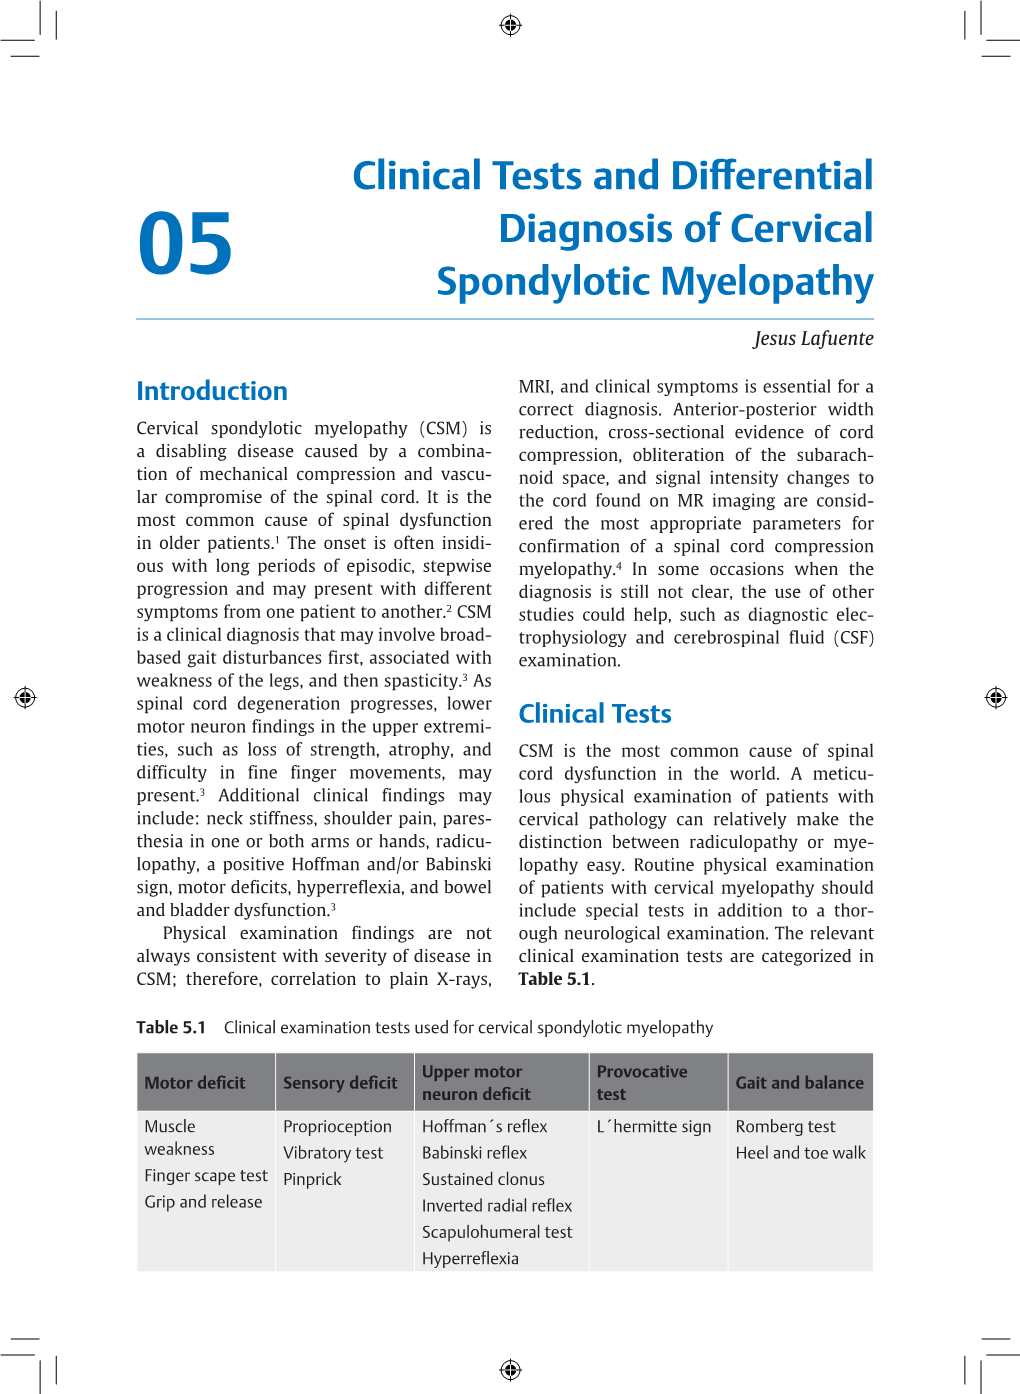 Clinical Tests and Differential Diagnosis of Cervical Spondylotic Myelopathy 39